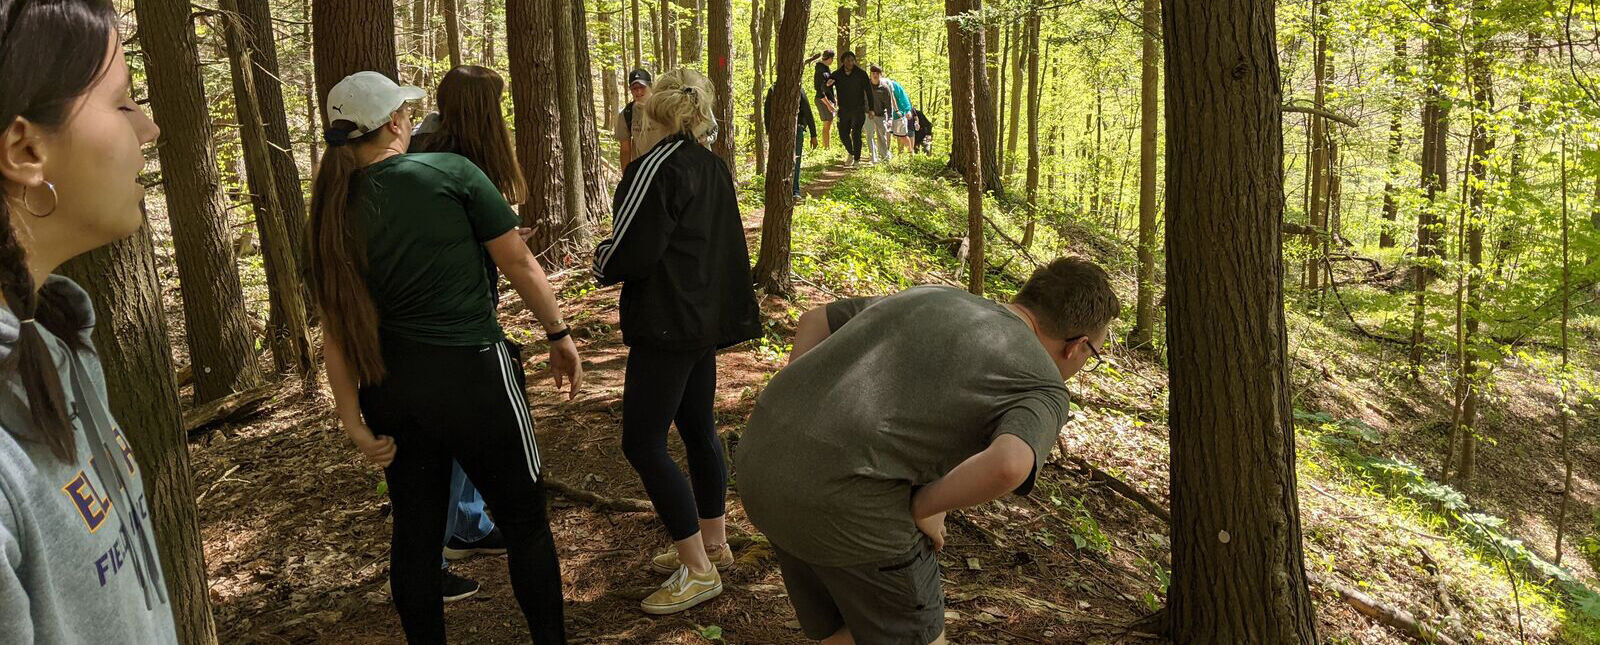 Students walk through a wooded area and examine some trees